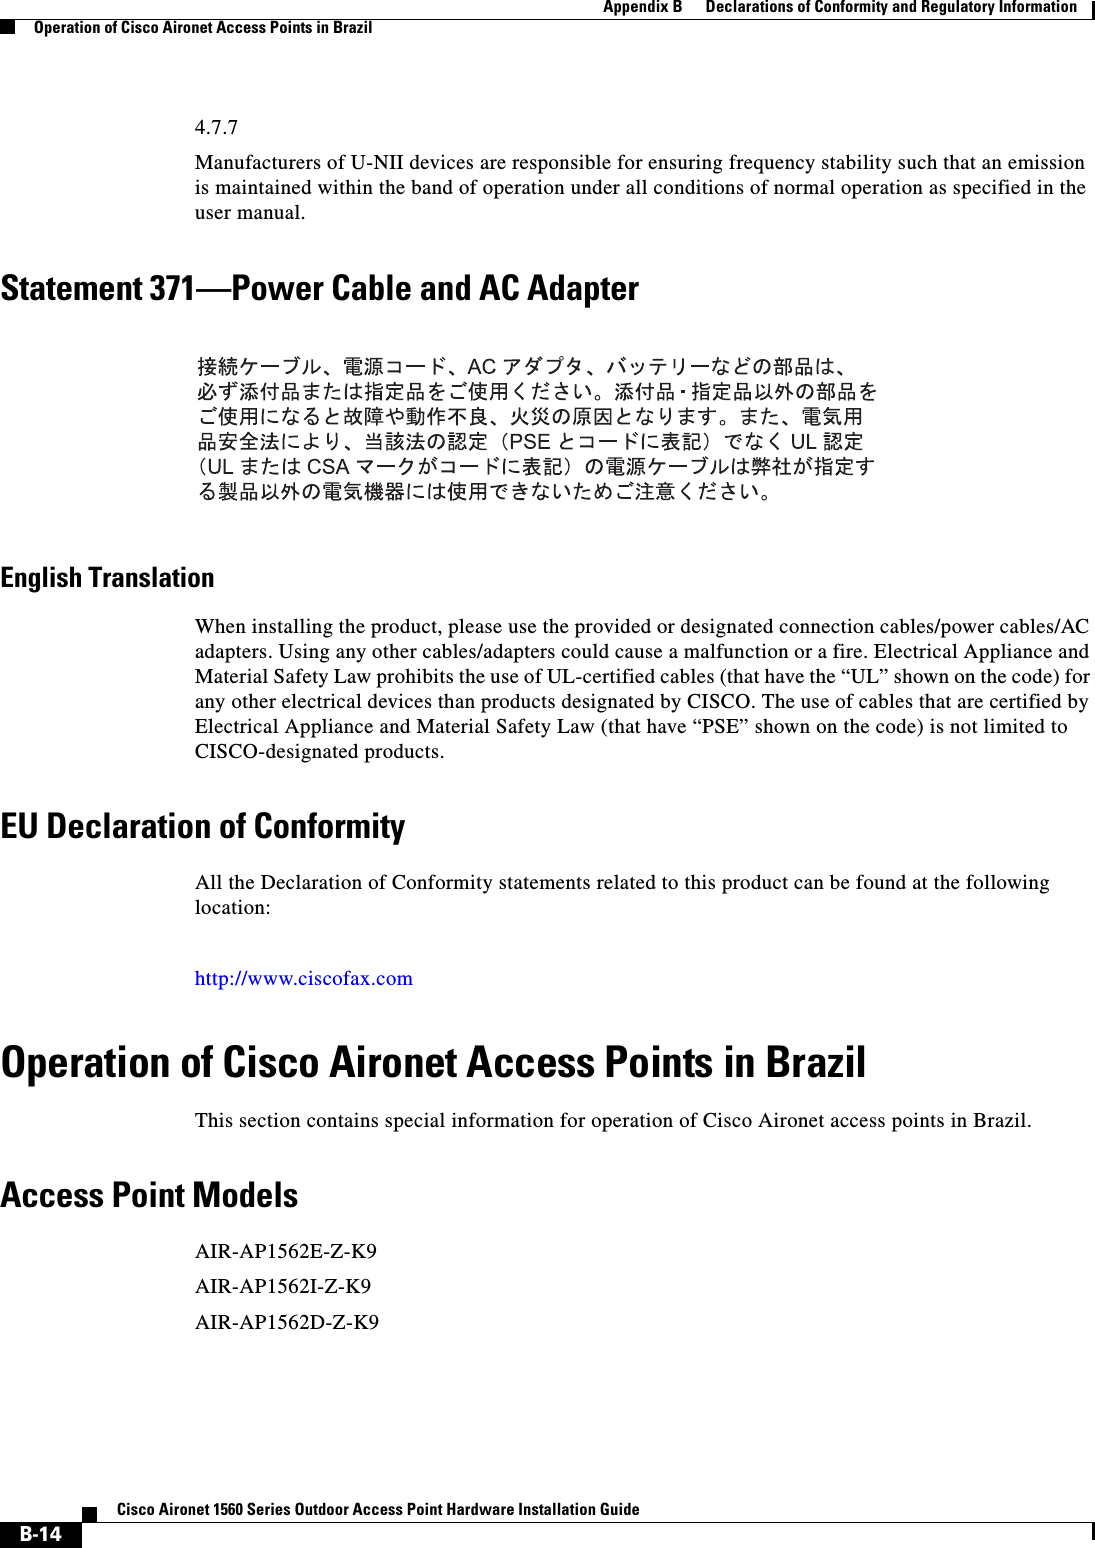  B-14Cisco Aironet 1560 Series Outdoor Access Point Hardware Installation Guide Appendix B      Declarations of Conformity and Regulatory InformationOperation of Cisco Aironet Access Points in Brazil4.7.7Manufacturers of U-NII devices are responsible for ensuring frequency stability such that an emission is maintained within the band of operation under all conditions of normal operation as specified in the user manual.Statement 371—Power Cable and AC AdapterEnglish TranslationWhen installing the product, please use the provided or designated connection cables/power cables/AC adapters. Using any other cables/adapters could cause a malfunction or a fire. Electrical Appliance and Material Safety Law prohibits the use of UL-certified cables (that have the “UL” shown on the code) for any other electrical devices than products designated by CISCO. The use of cables that are certified by Electrical Appliance and Material Safety Law (that have “PSE” shown on the code) is not limited to CISCO-designated products.EU Declaration of ConformityAll the Declaration of Conformity statements related to this product can be found at the following location:http://www.ciscofax.comOperation of Cisco Aironet Access Points in BrazilThis section contains special information for operation of Cisco Aironet access points in Brazil.Access Point ModelsAIR-AP1562E-Z-K9AIR-AP1562I-Z-K9AIR-AP1562D-Z-K9